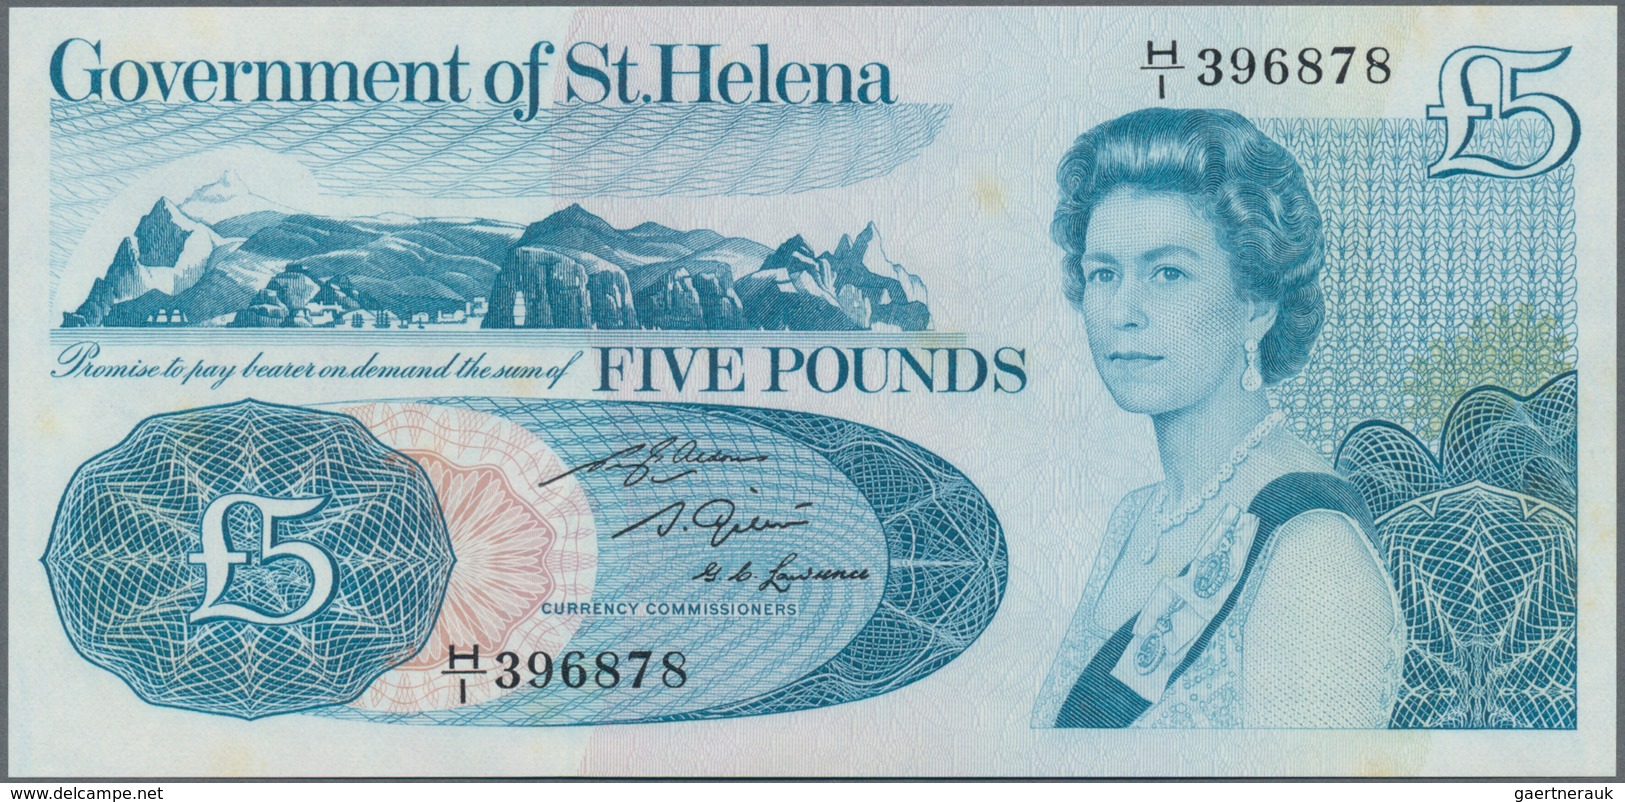 St. Helena: Nice set with 5 banknotes including 2x 1 Pound ND(1981) P.9 with running serial numbers